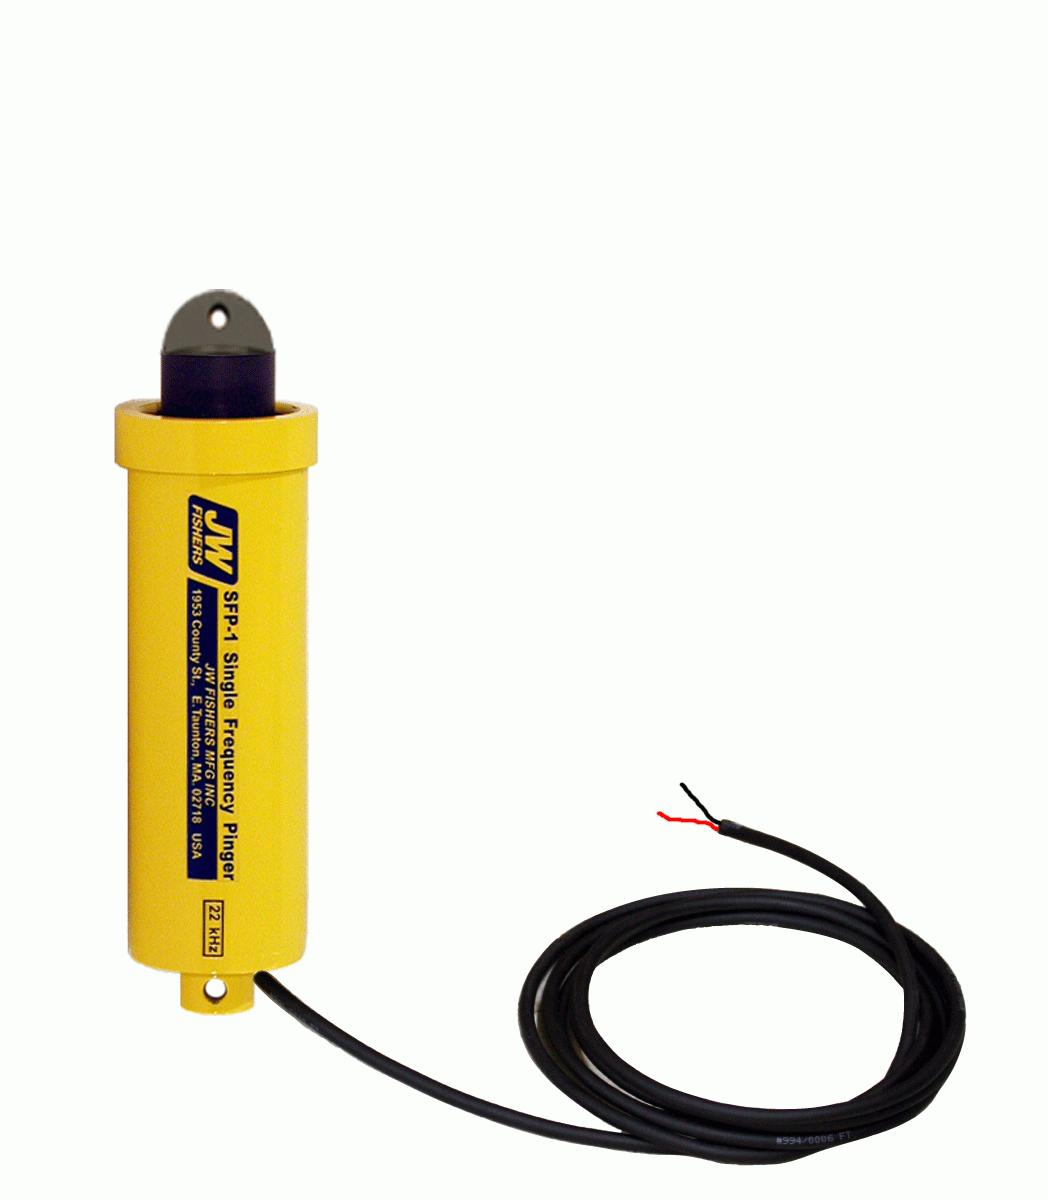 JW Fishers SFP-1 Single Frequency Pinger